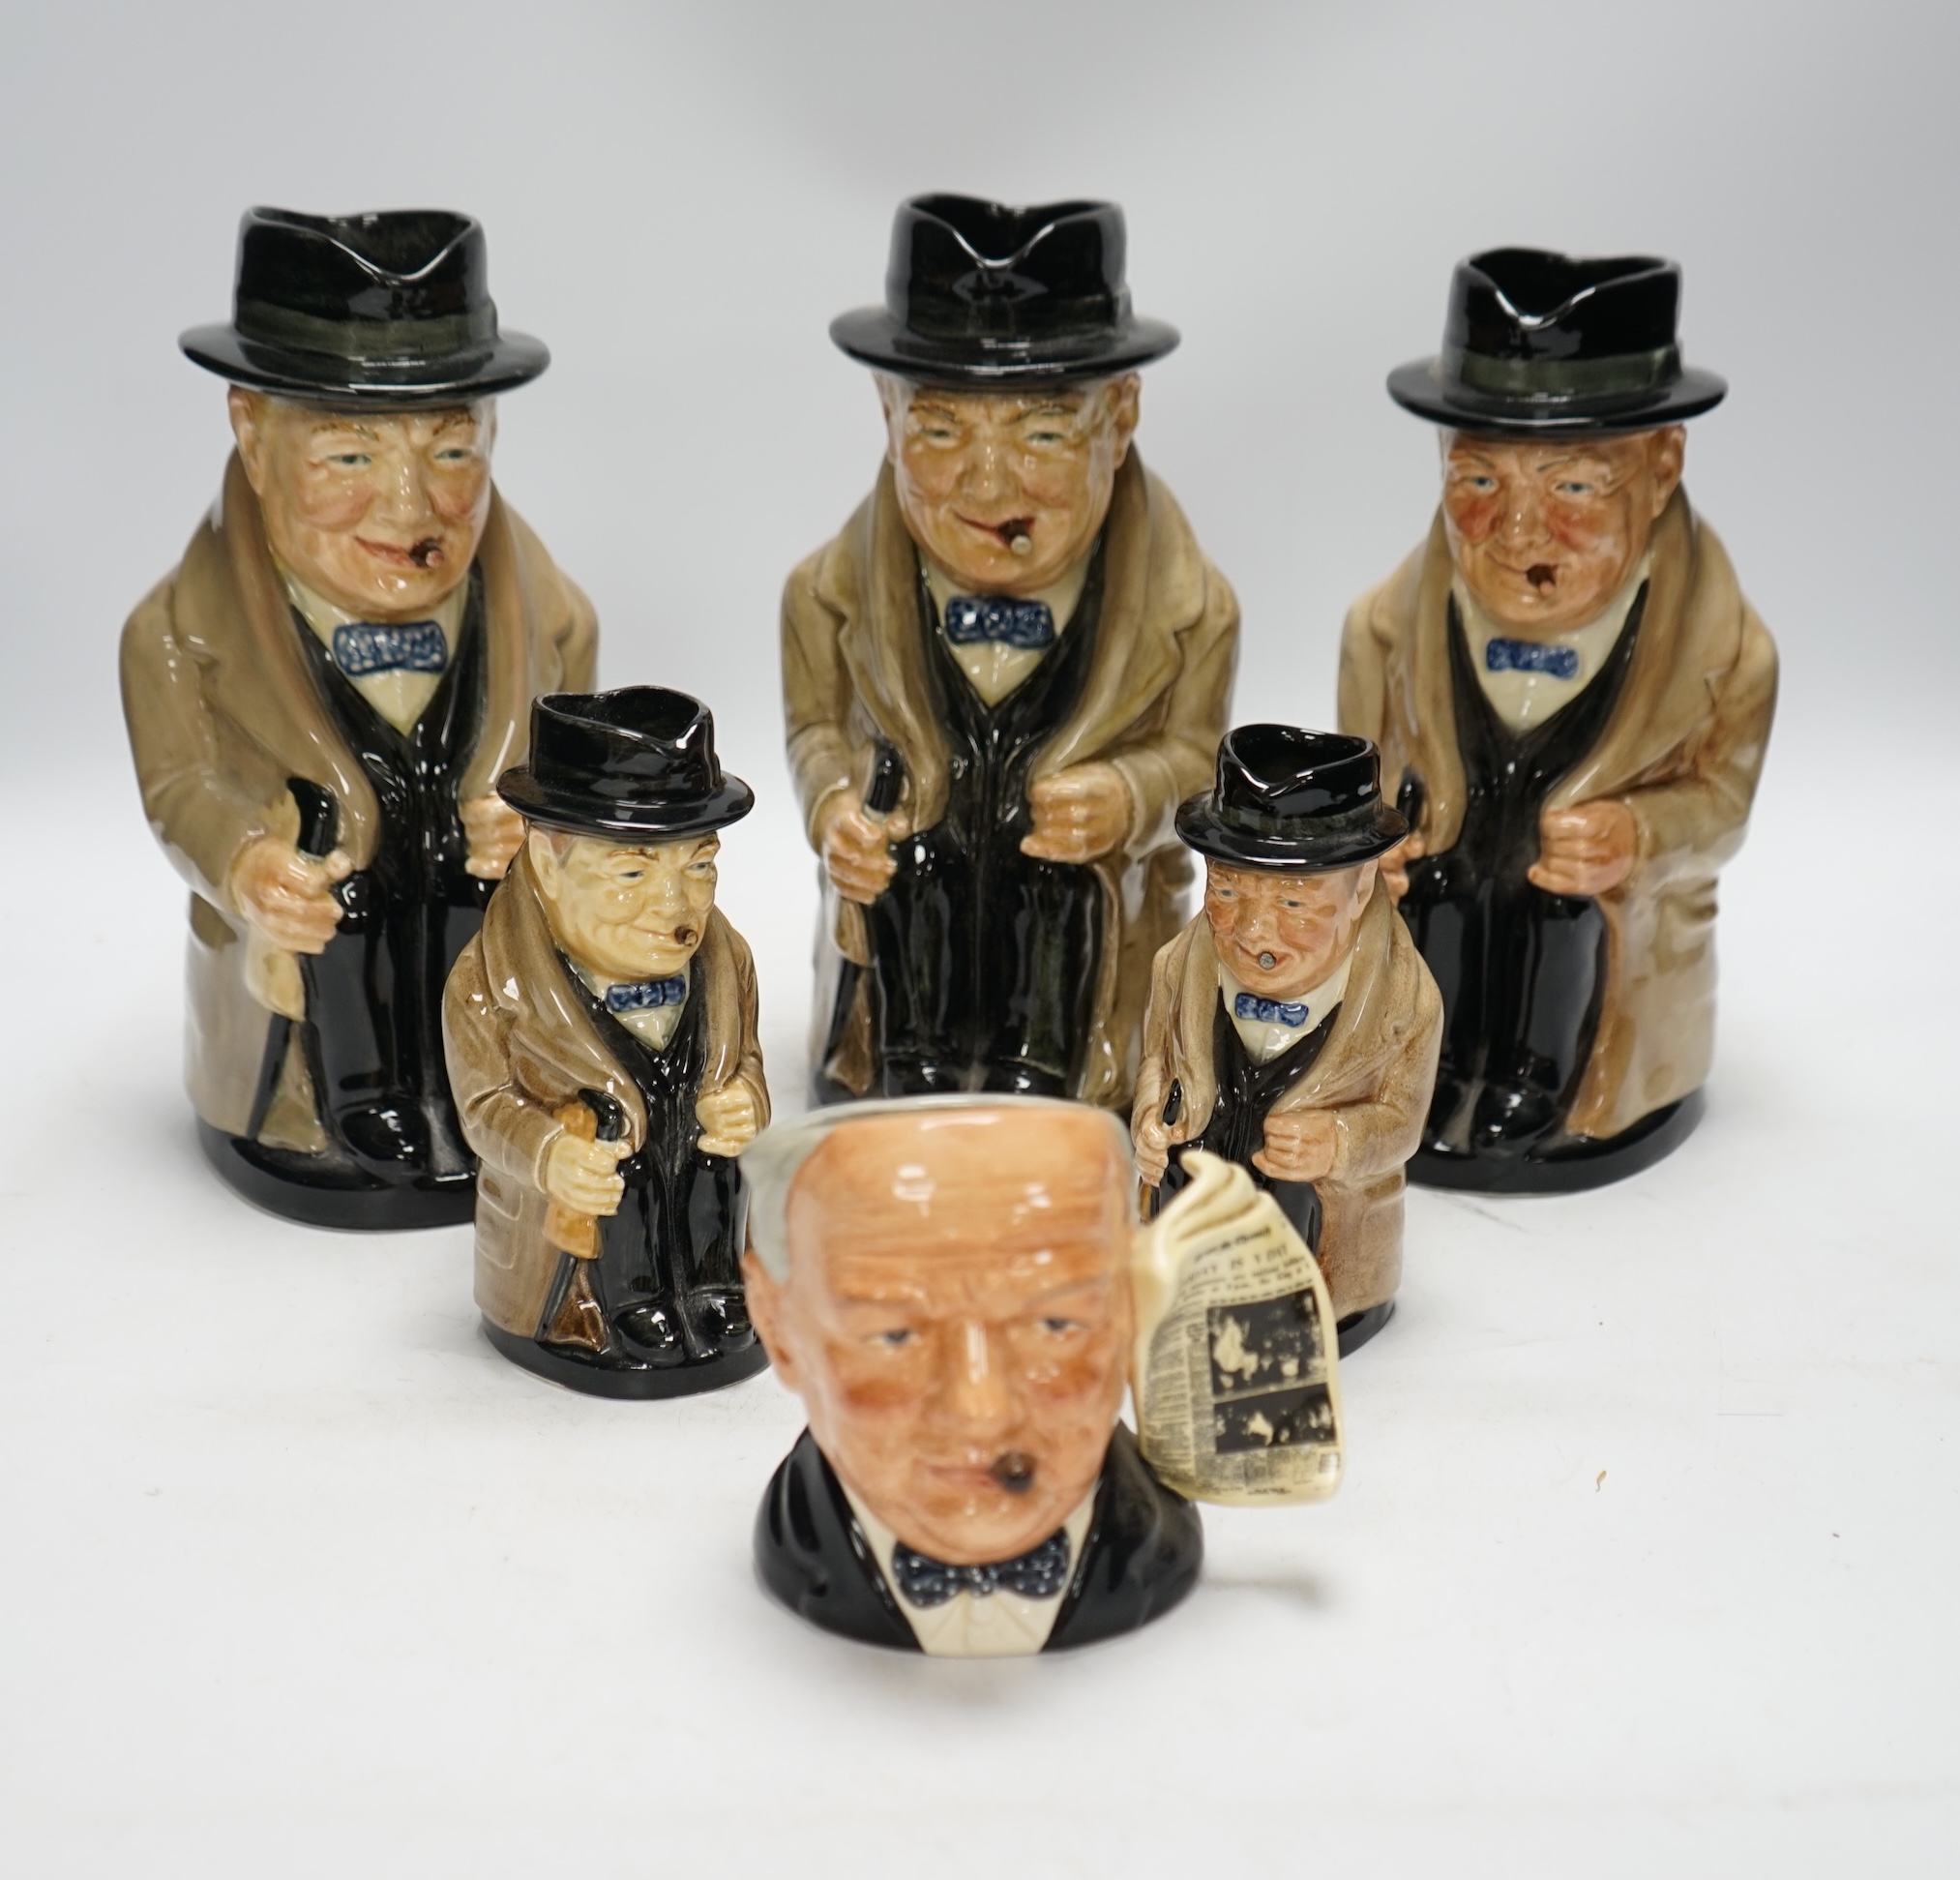 A group of six Doulton Winston Churchill character jugs, largest 23cm high. Condition - good, some crazing